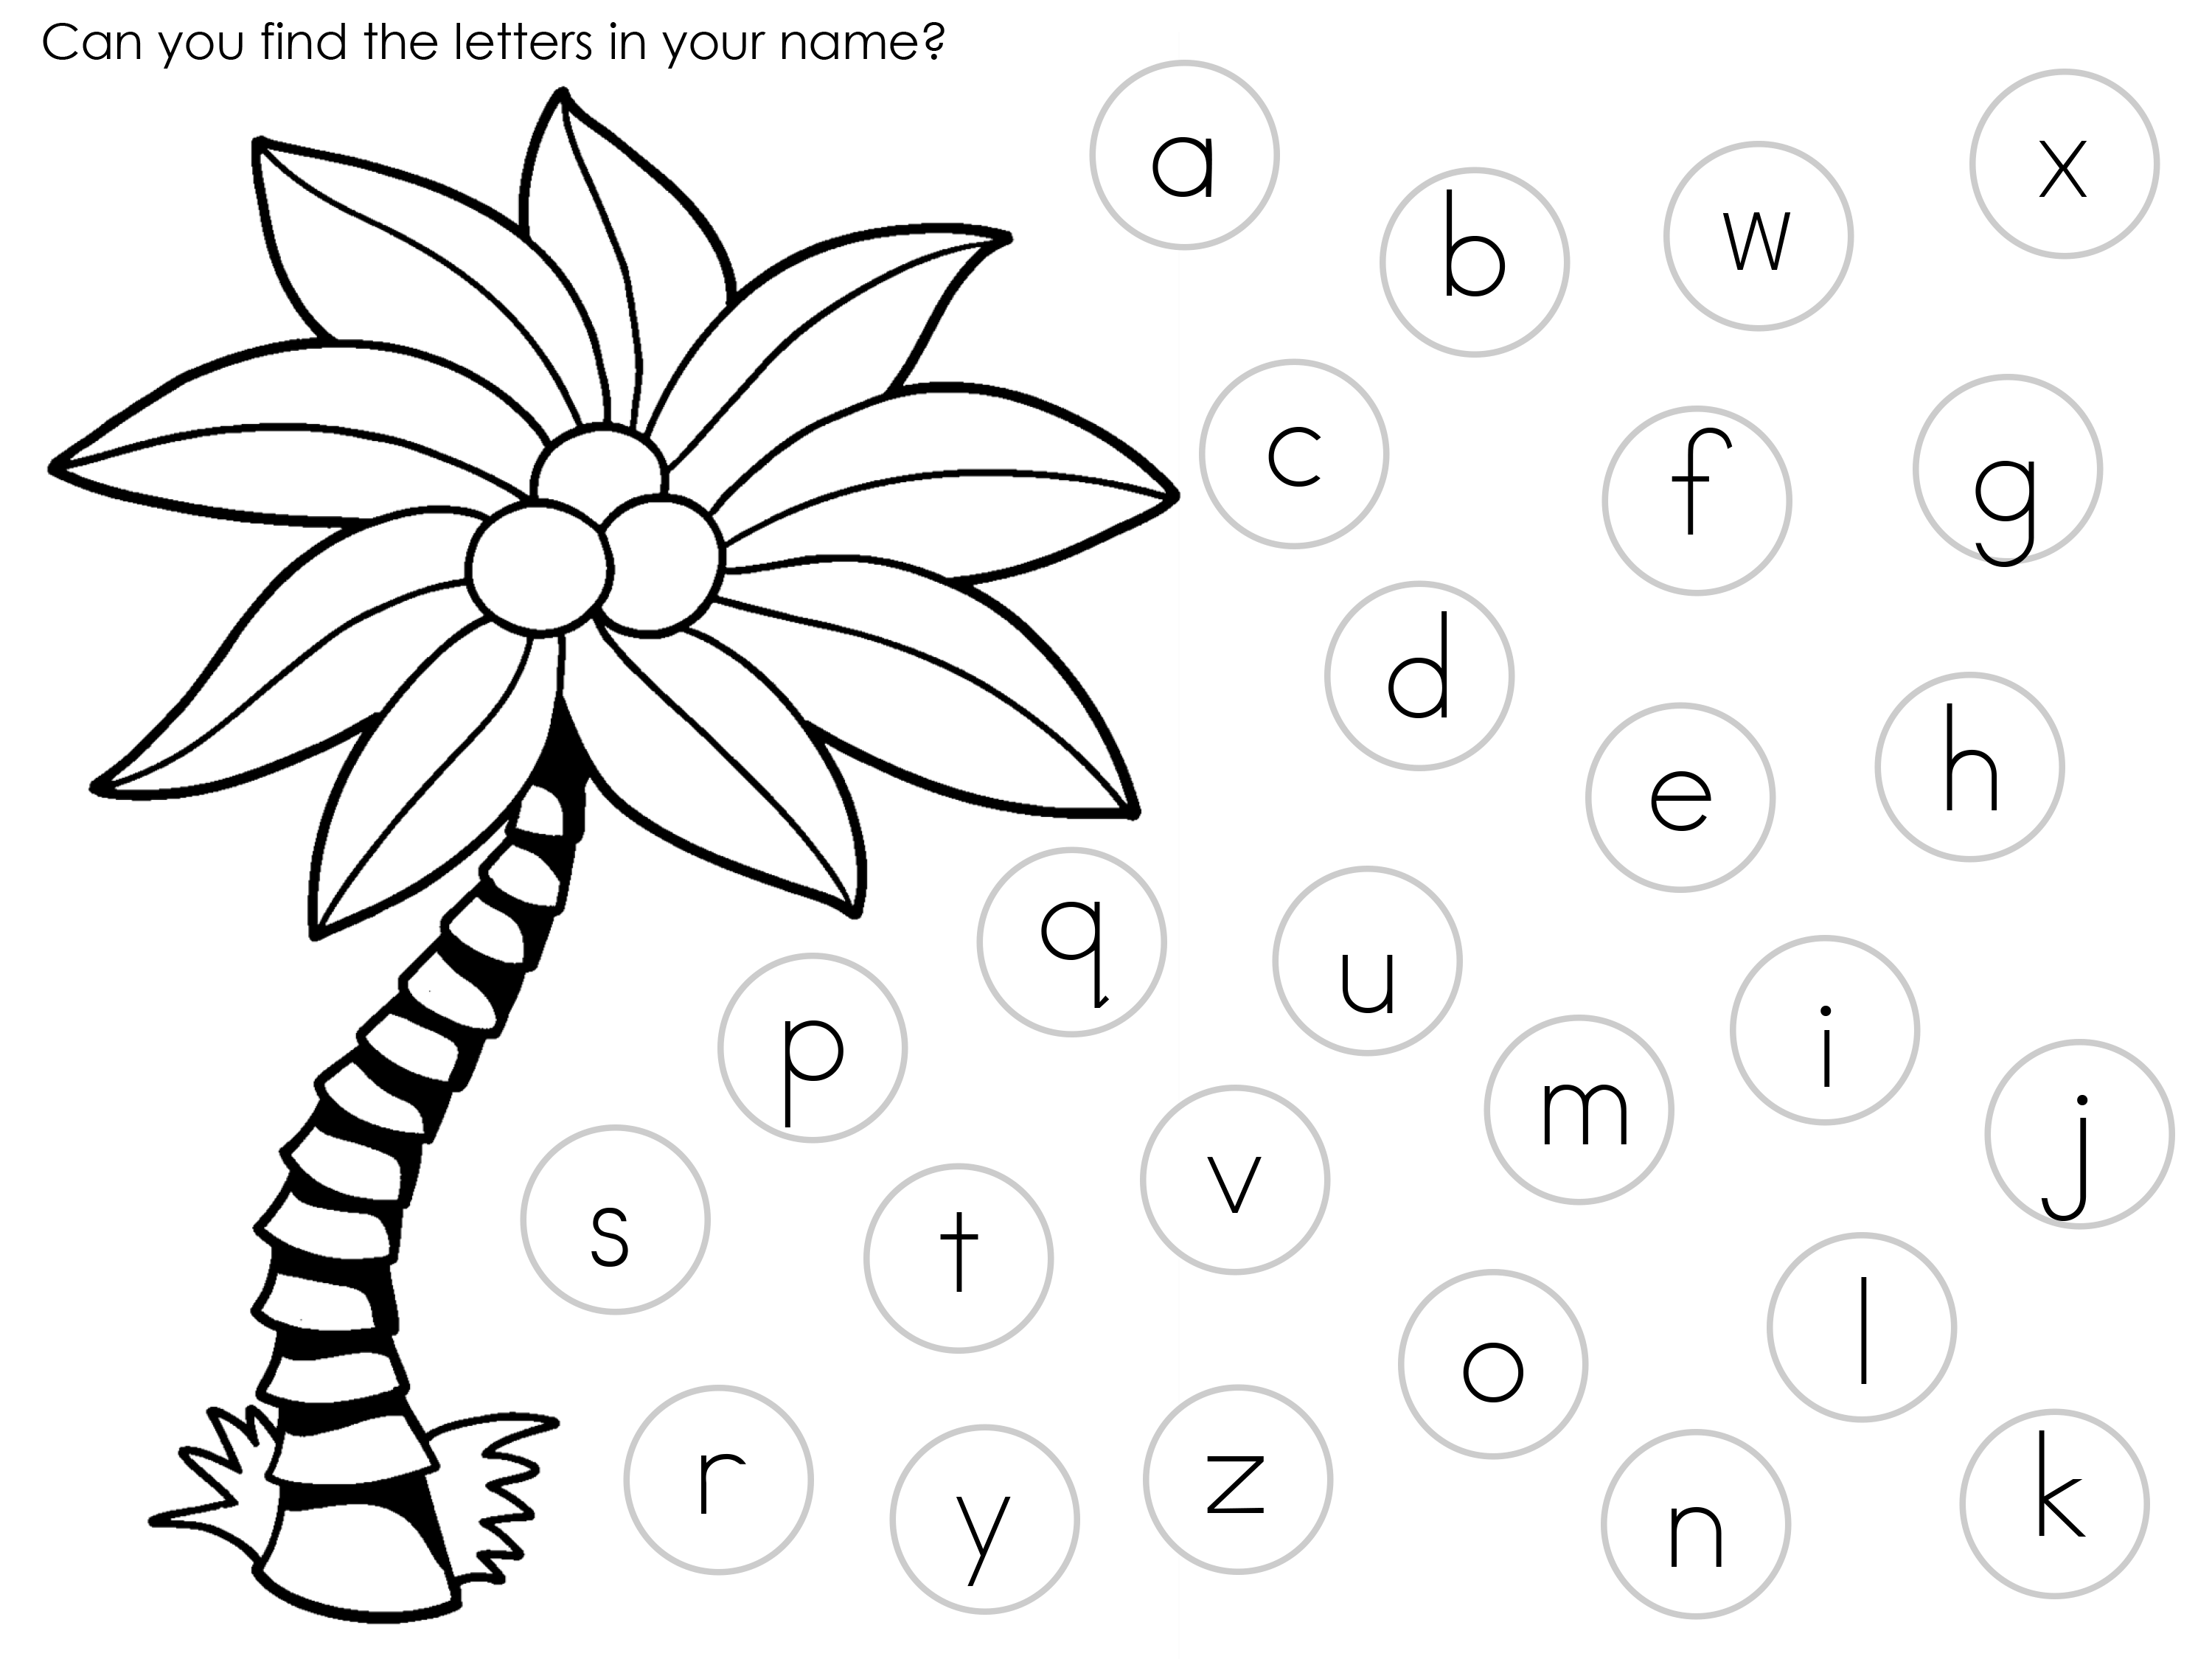 chicka-chicka-boom-boom-coloring-pages-coloring-home